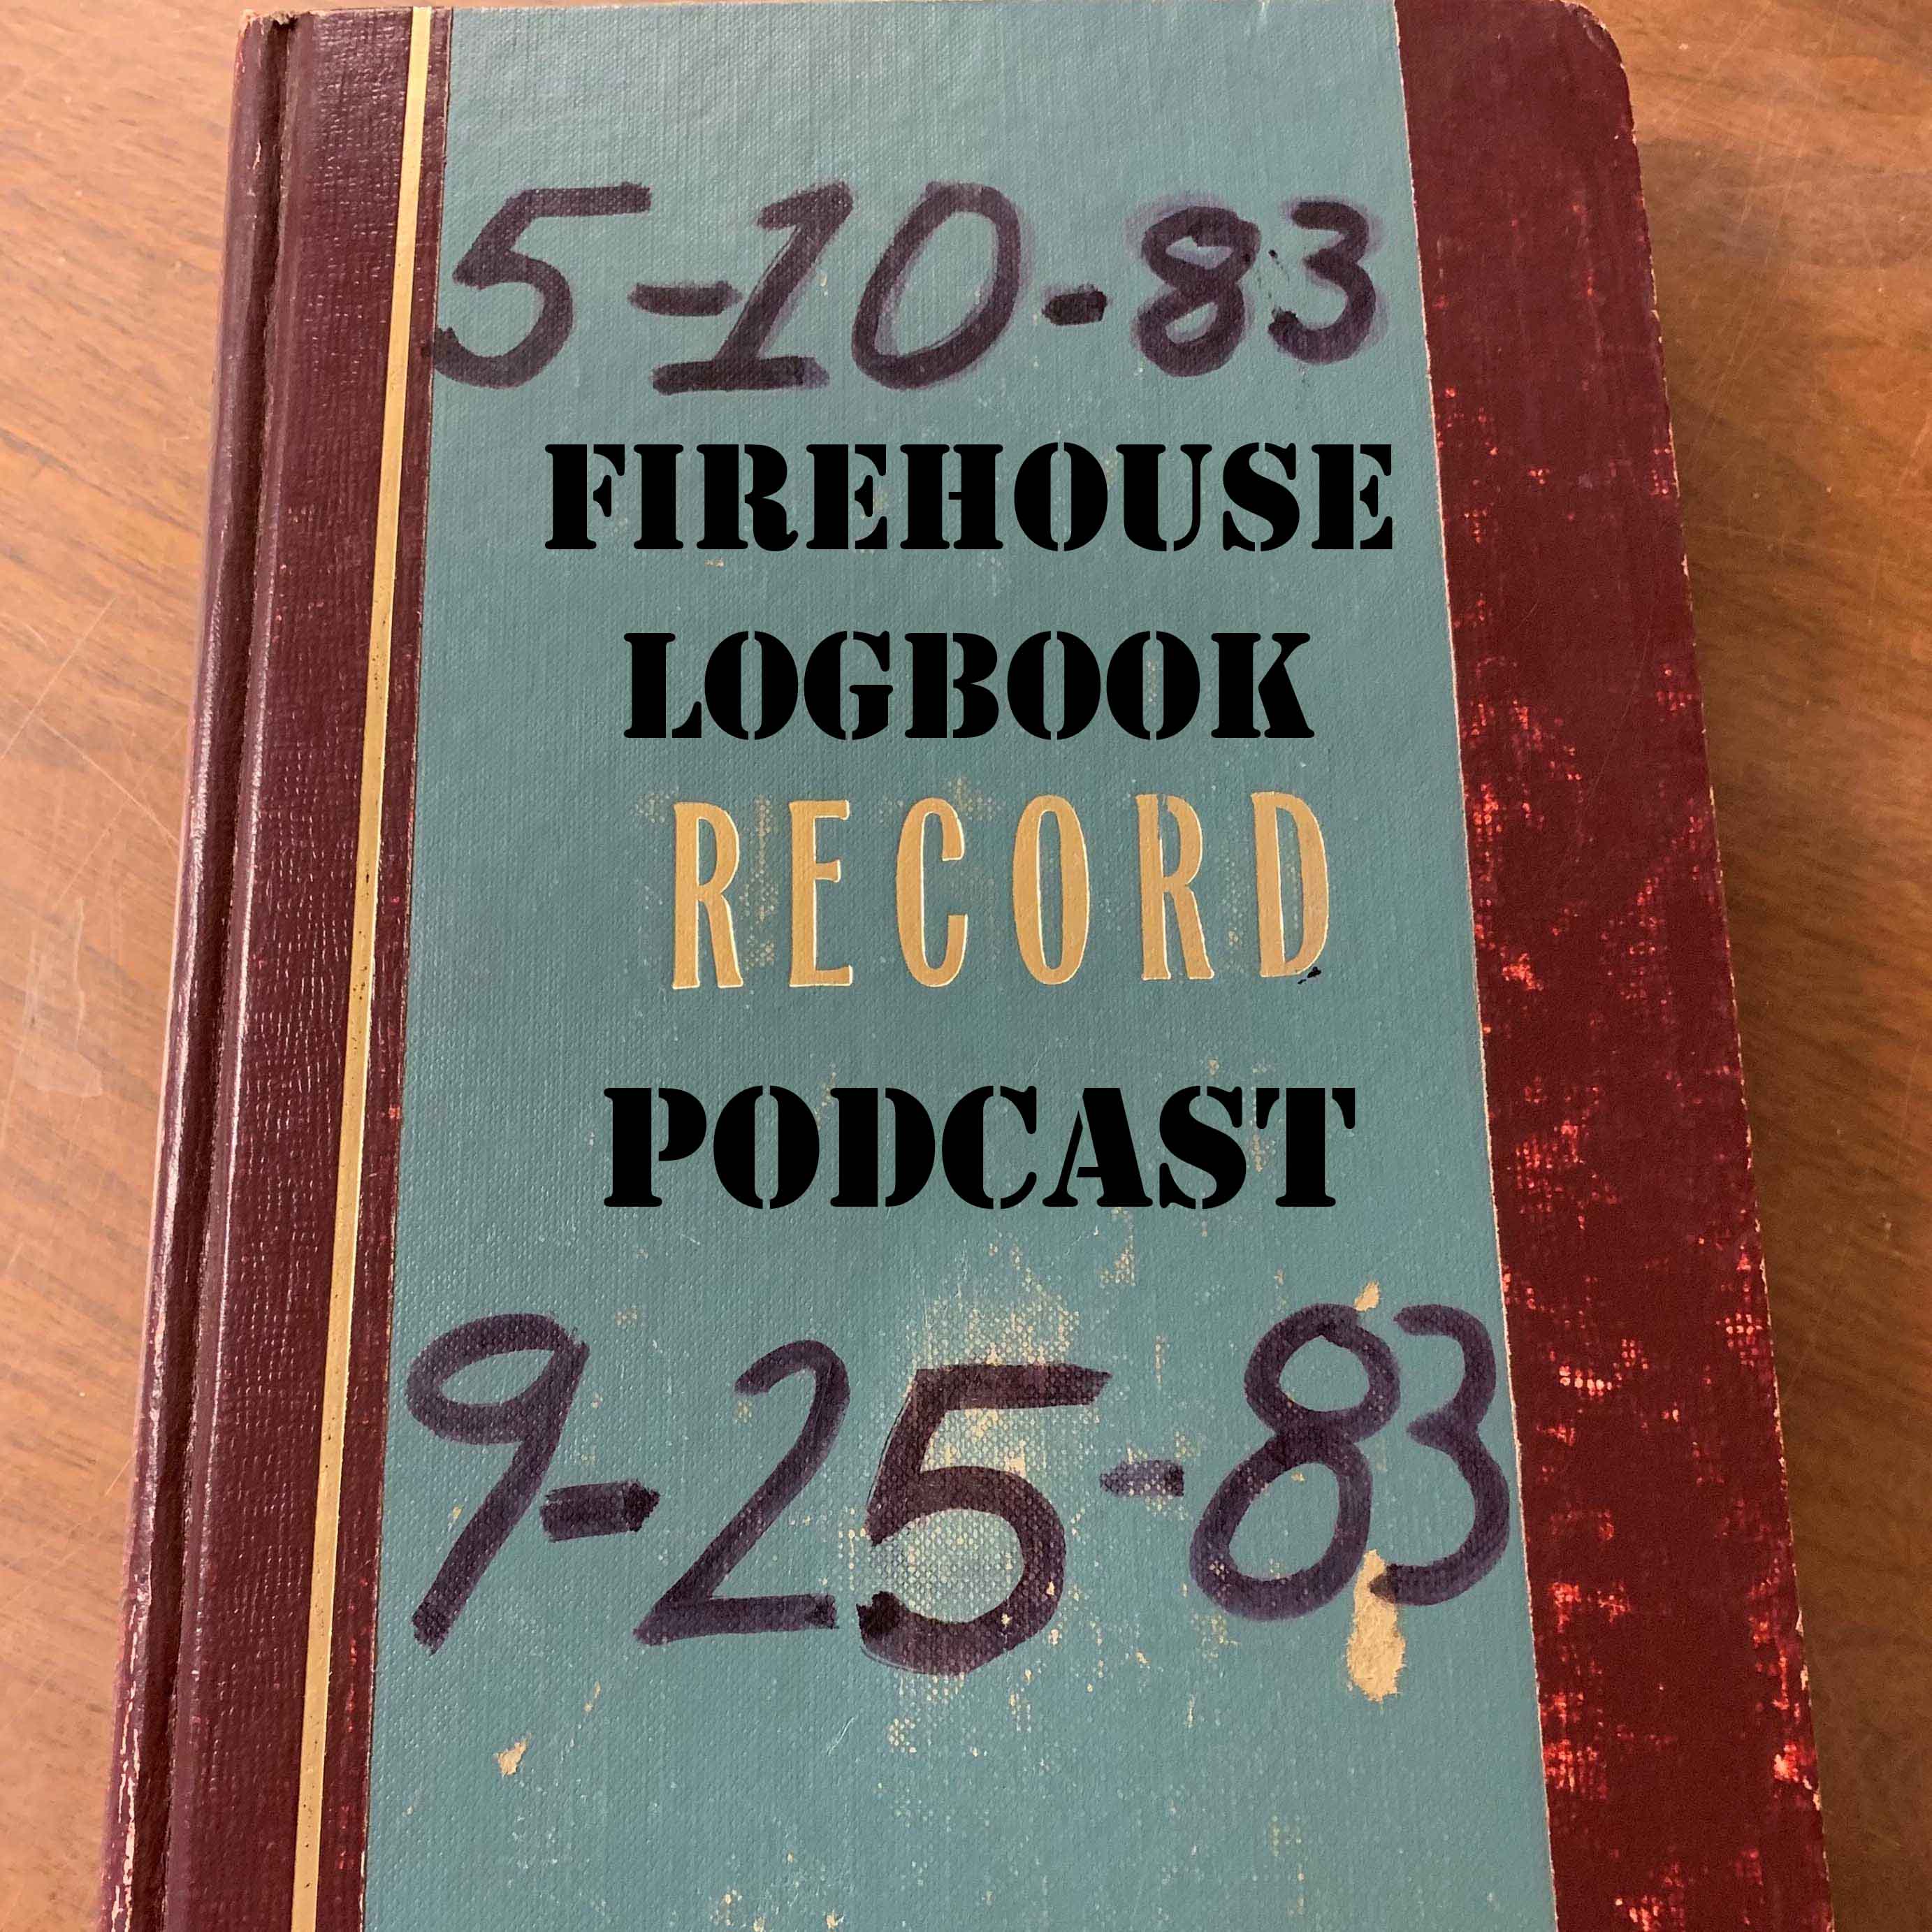 Show artwork for The Firehouse Logbook Podcast